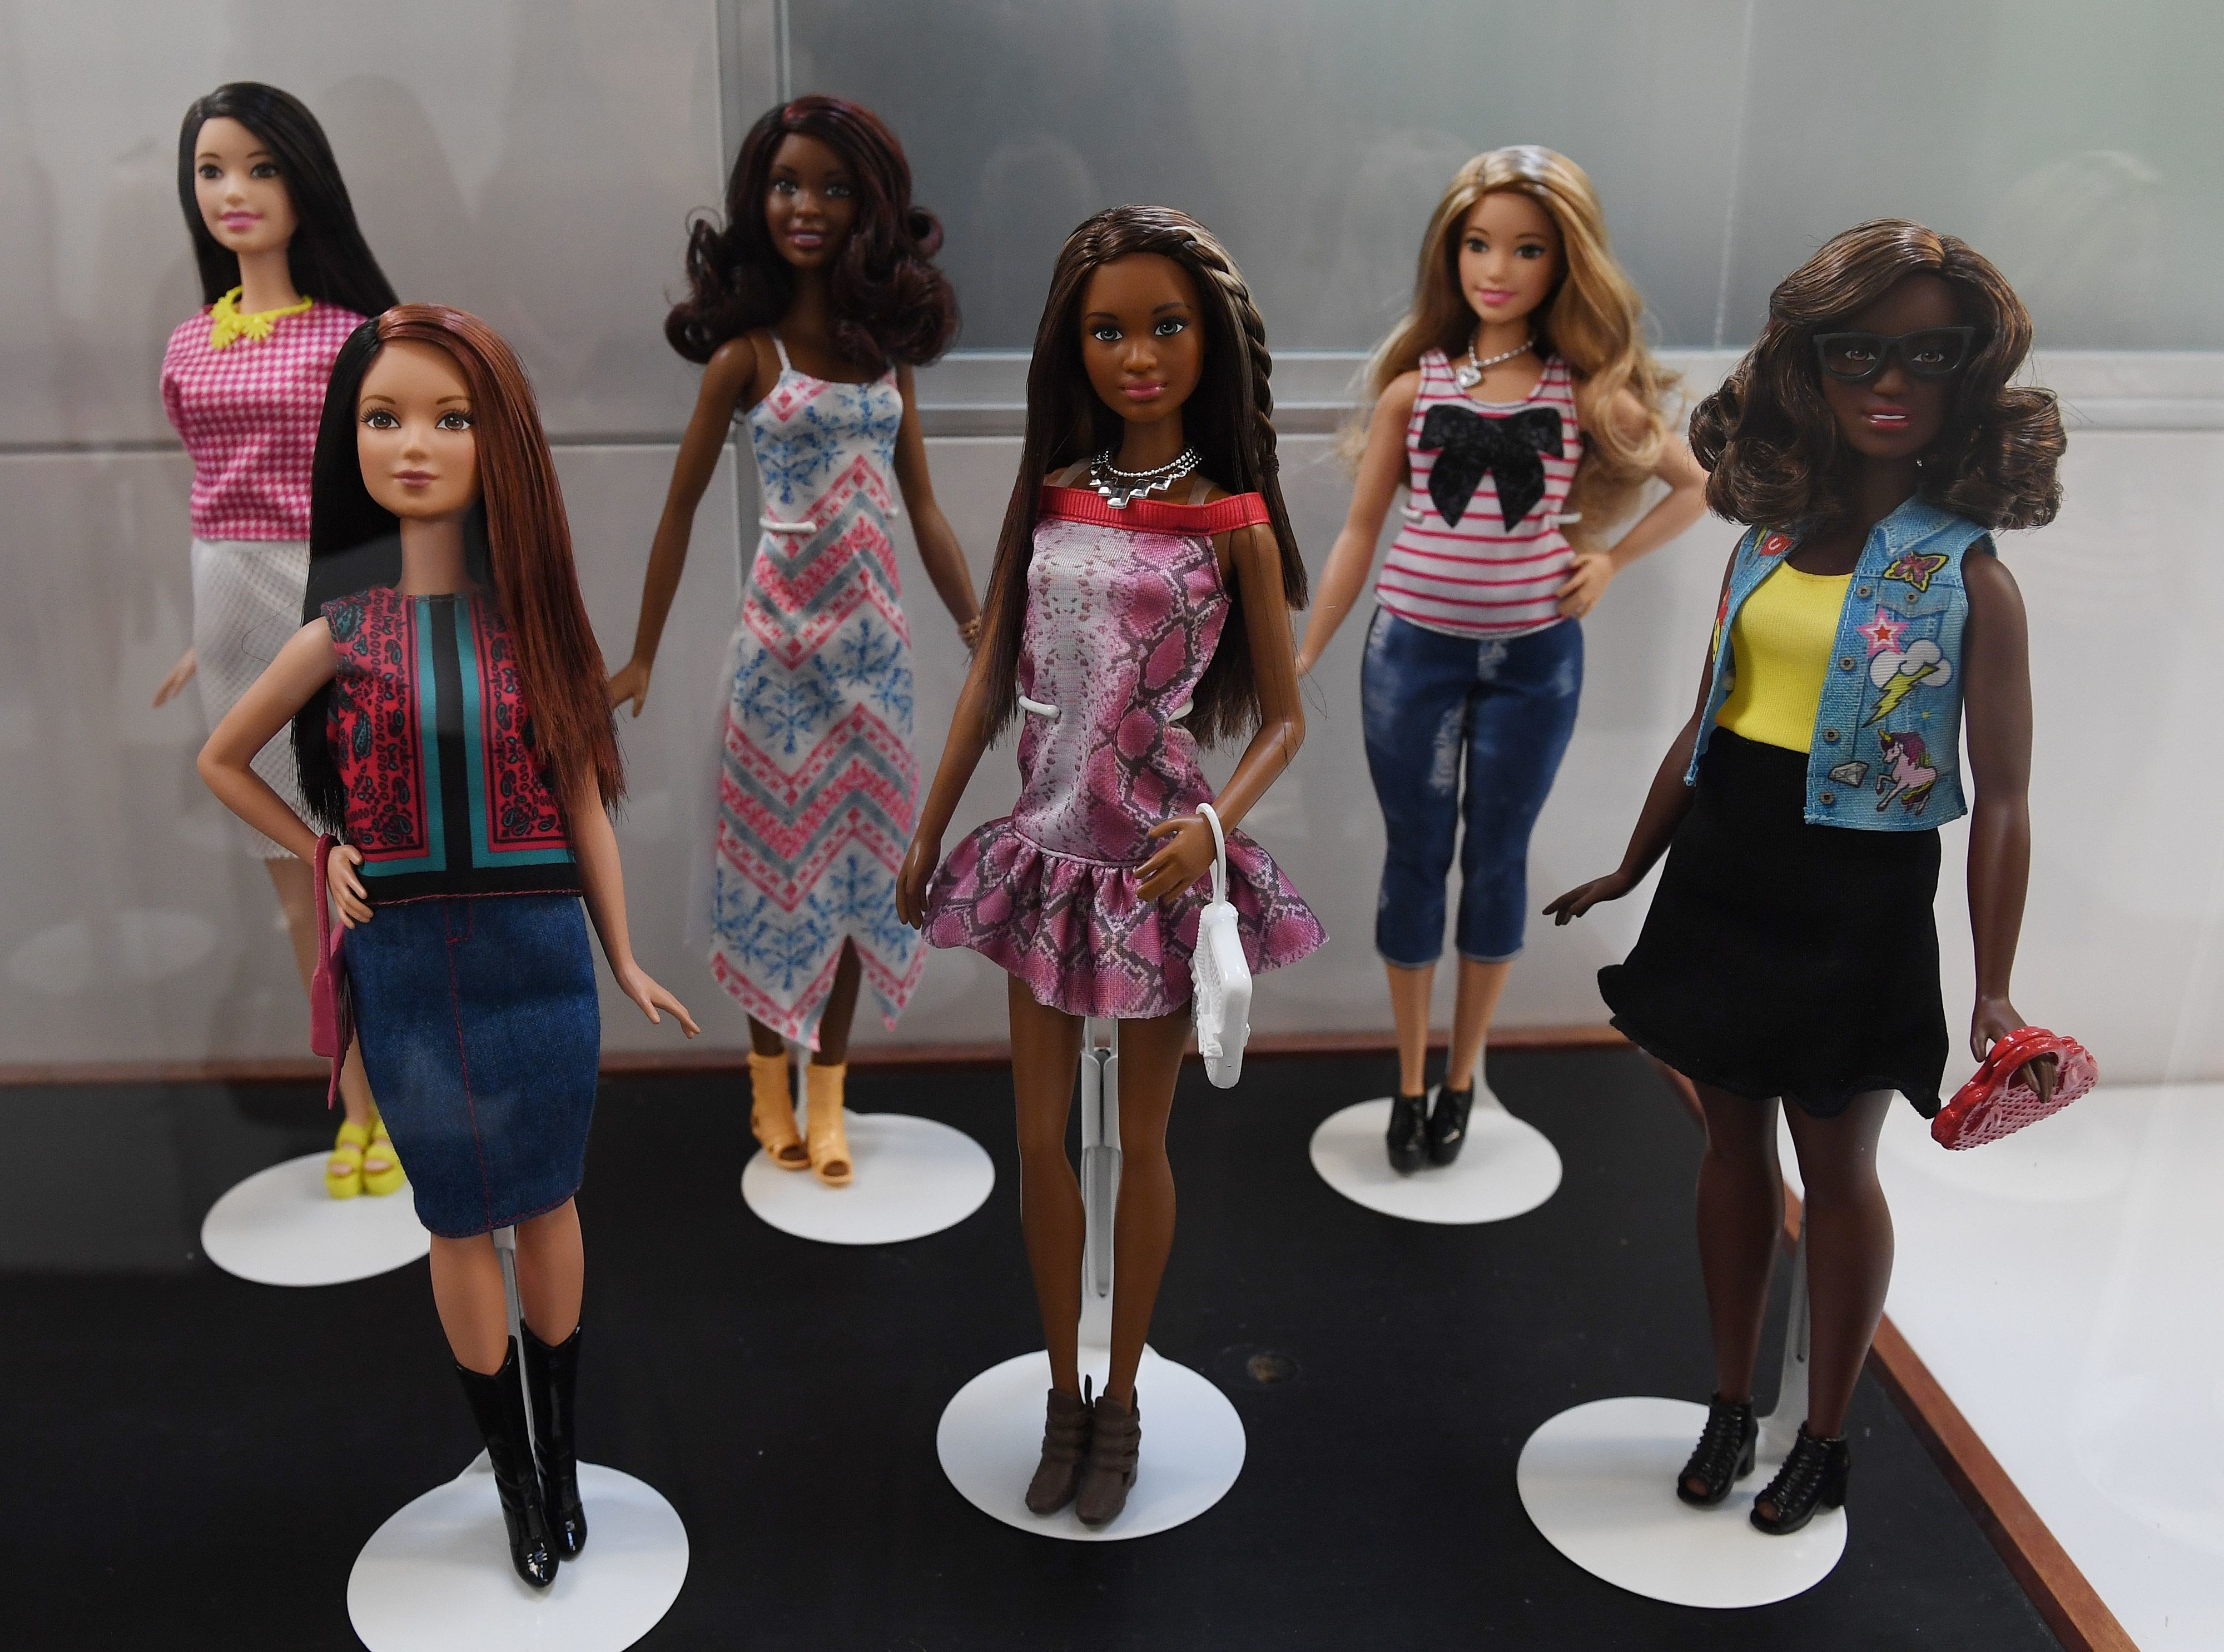 Barbie doll prototypes are displayed at a workshop in the Mattel design center as the iconic doll turns 60, in El Segundo, on December 7, 2018